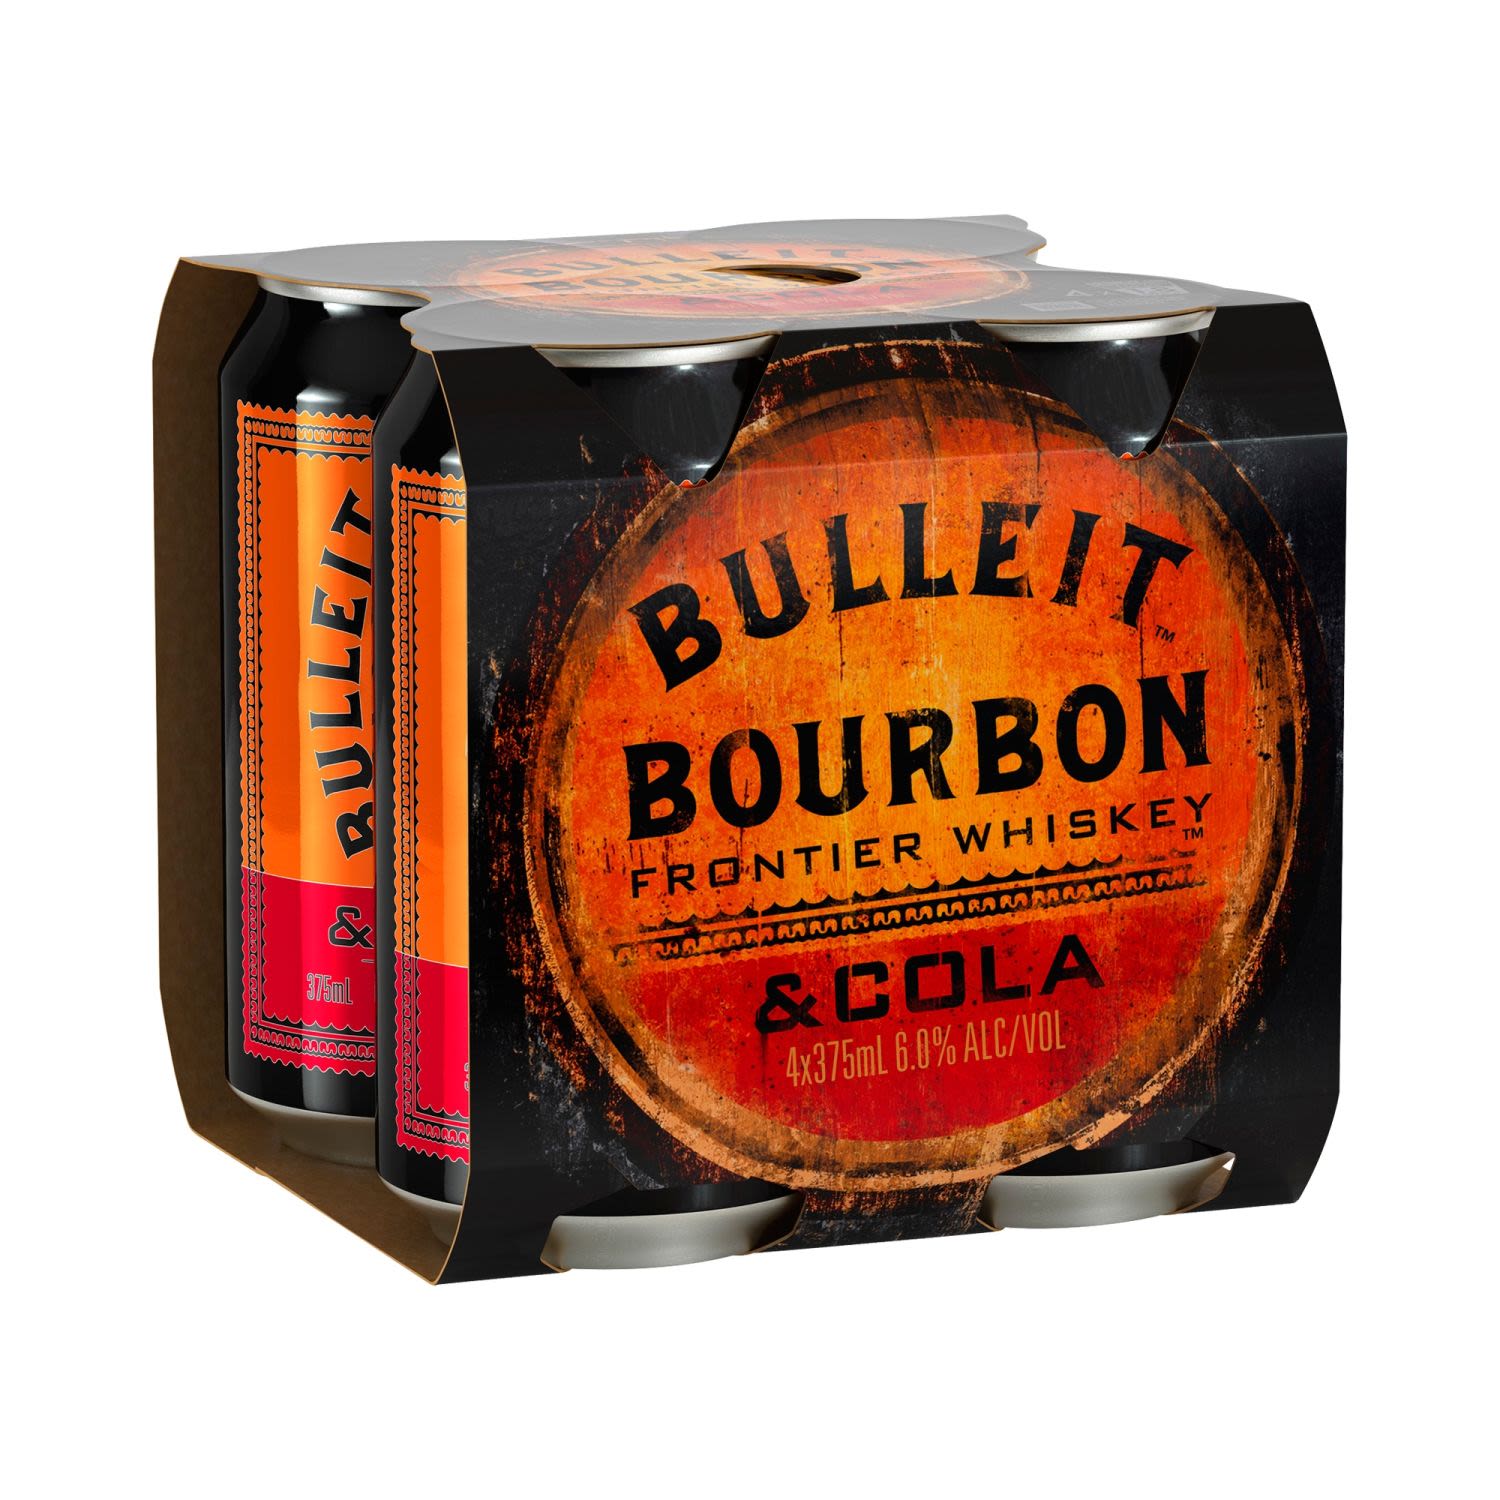 Enjoy this iconic Bourbon blended with cola and with that superior smooth taste that comes from the extra strength.<br /> <br />Alcohol Volume: 9.00%<br /><br />Pack Format: 4 Pack<br /><br />Standard Drinks: 1.8</br /><br />Pack Type: Can<br />